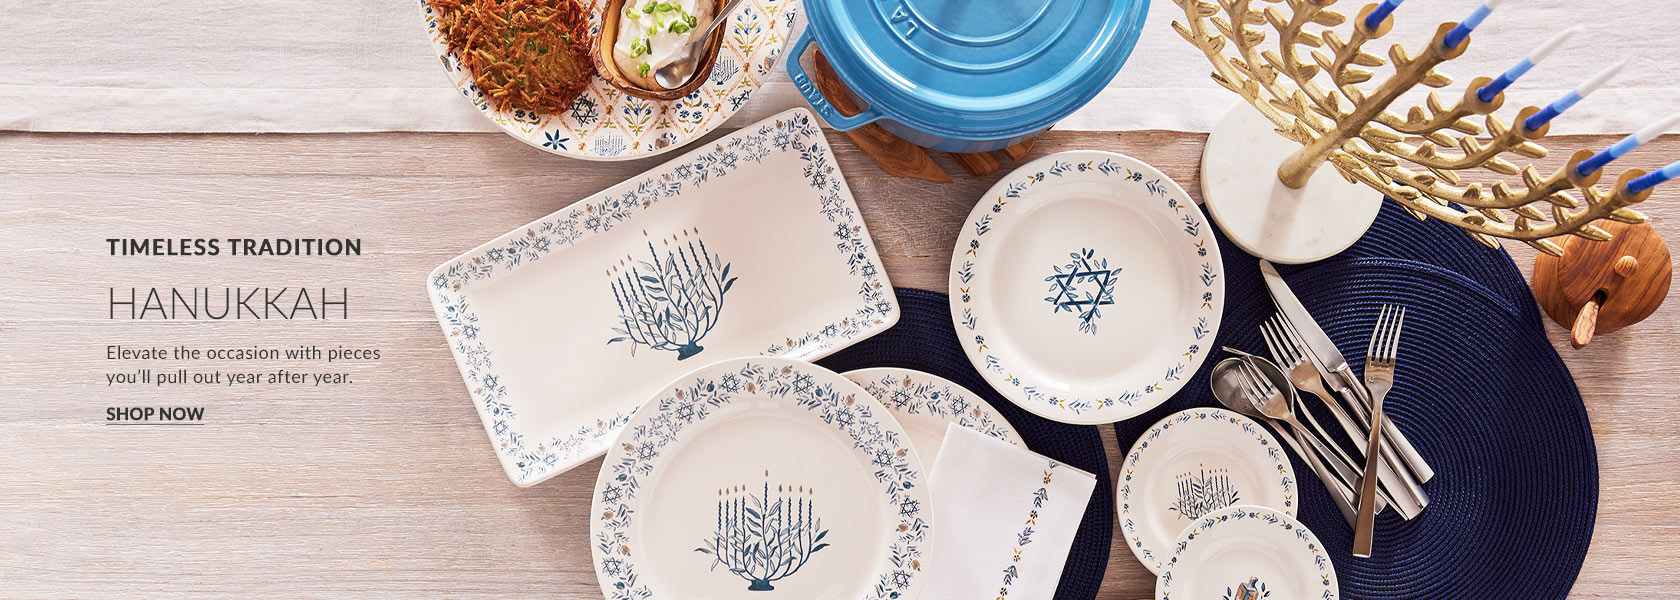 Timeless tradition. Hanukkay. Elevate the occasion with pieces you'll pull out year after year. Shop Now.